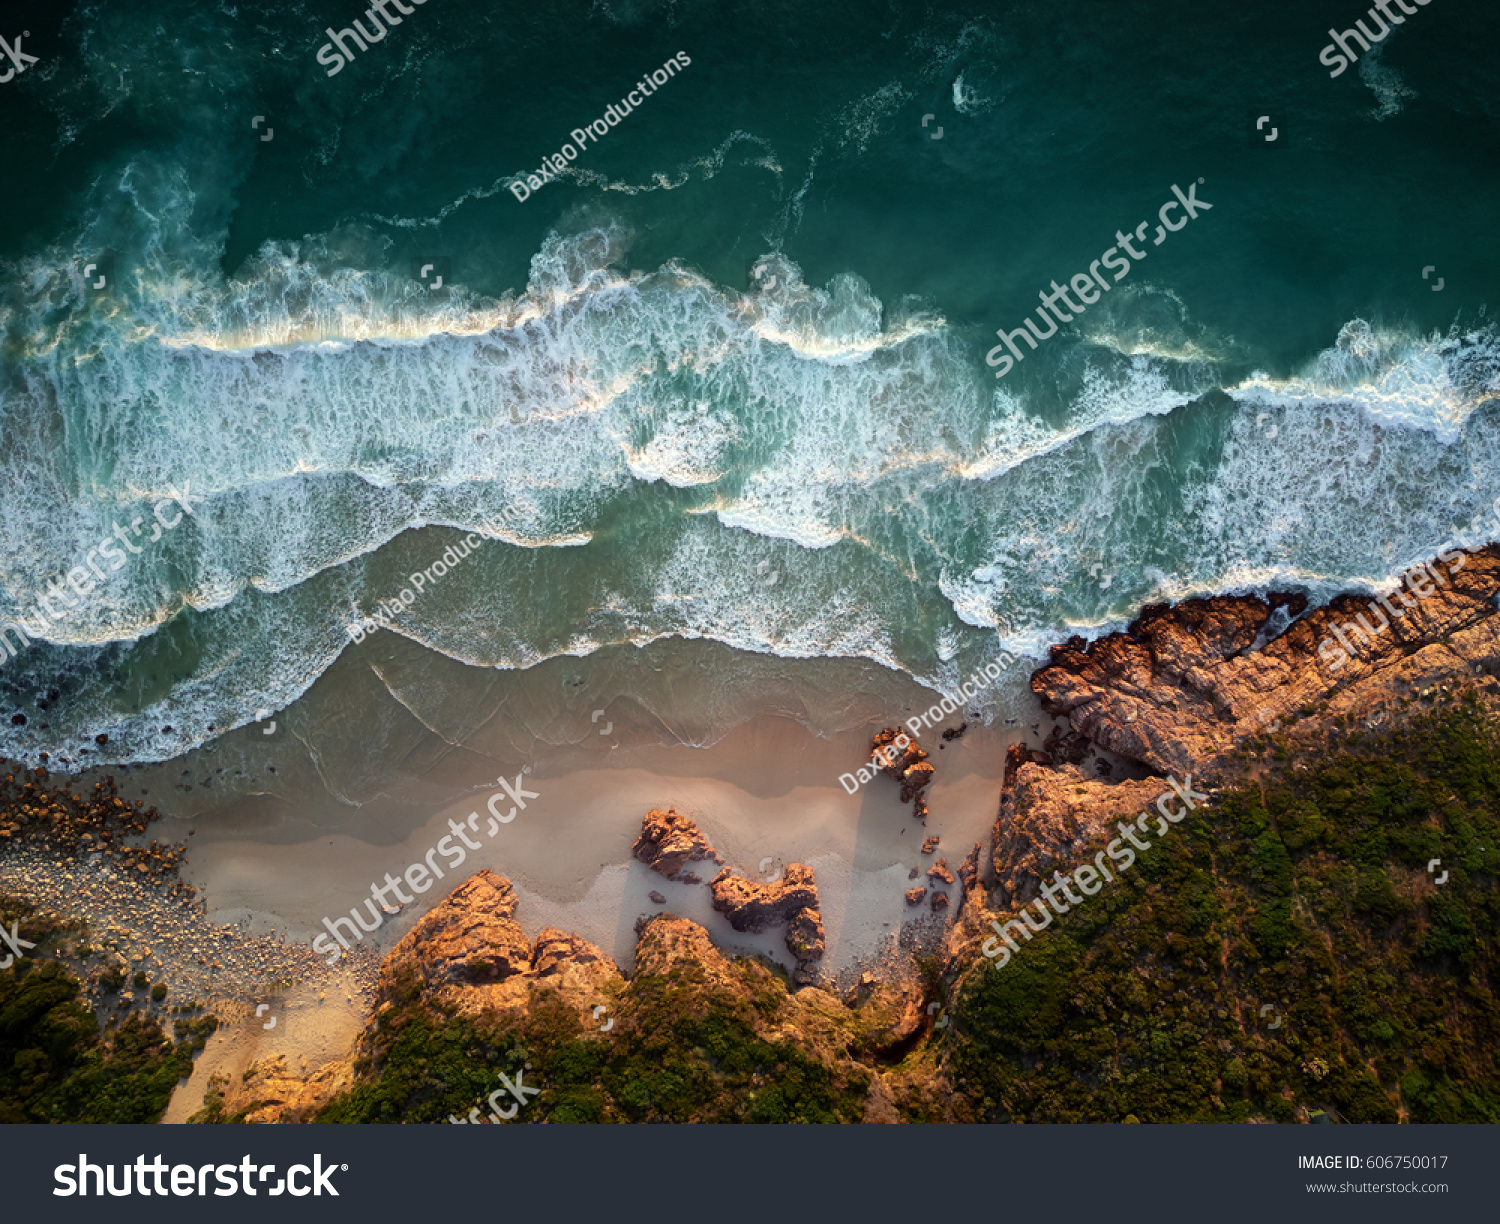 Small waves repeatedly crashing on small sandy shore bay beach with rough rocky coastline, aerial photography overhead #606750017